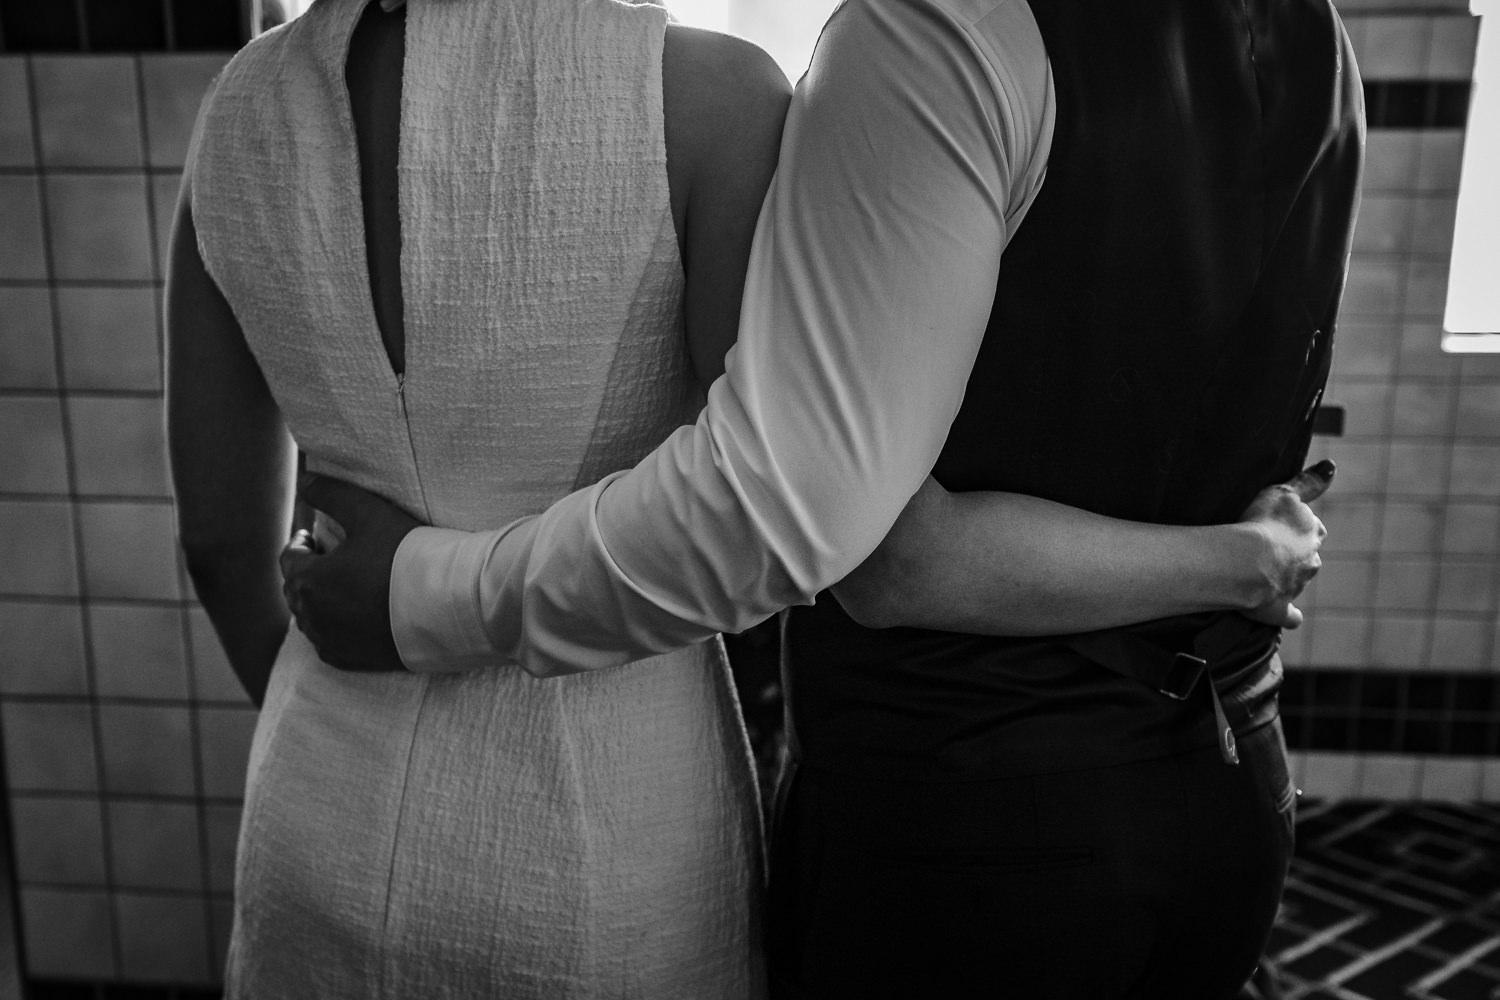 black and white image of bride and groom hugging from behind